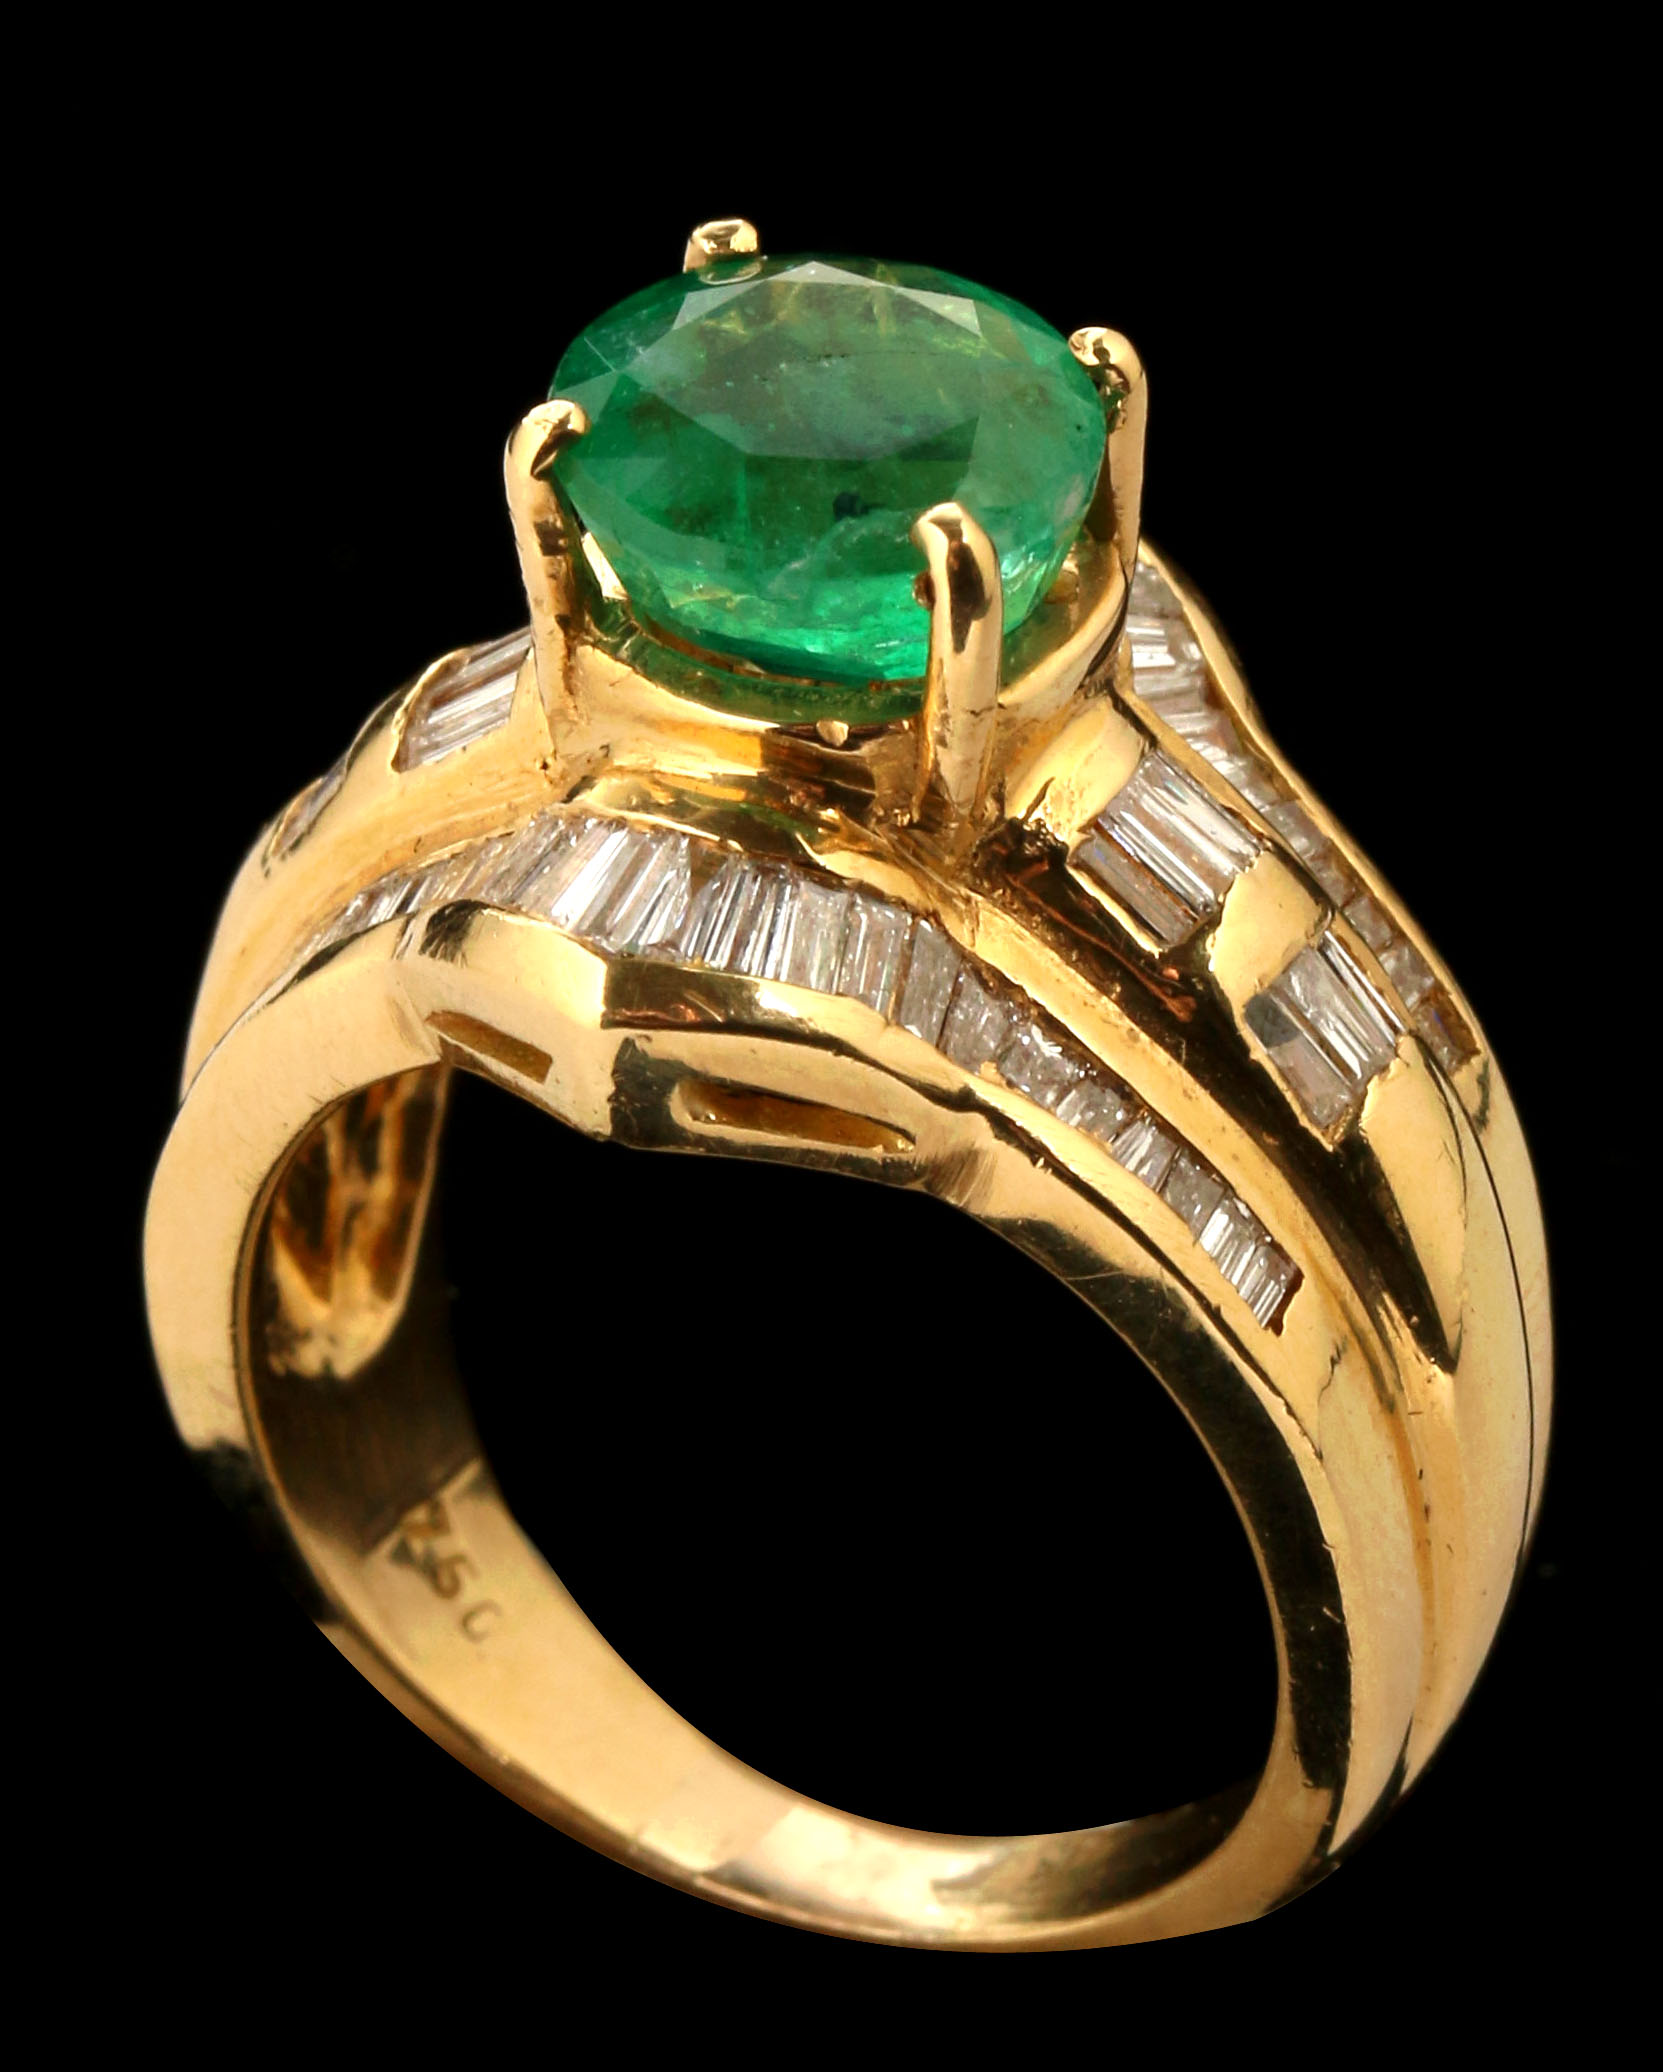 AN 18K COLUMBIAN EMERALD AND DIAMOND COCKTAIL RING